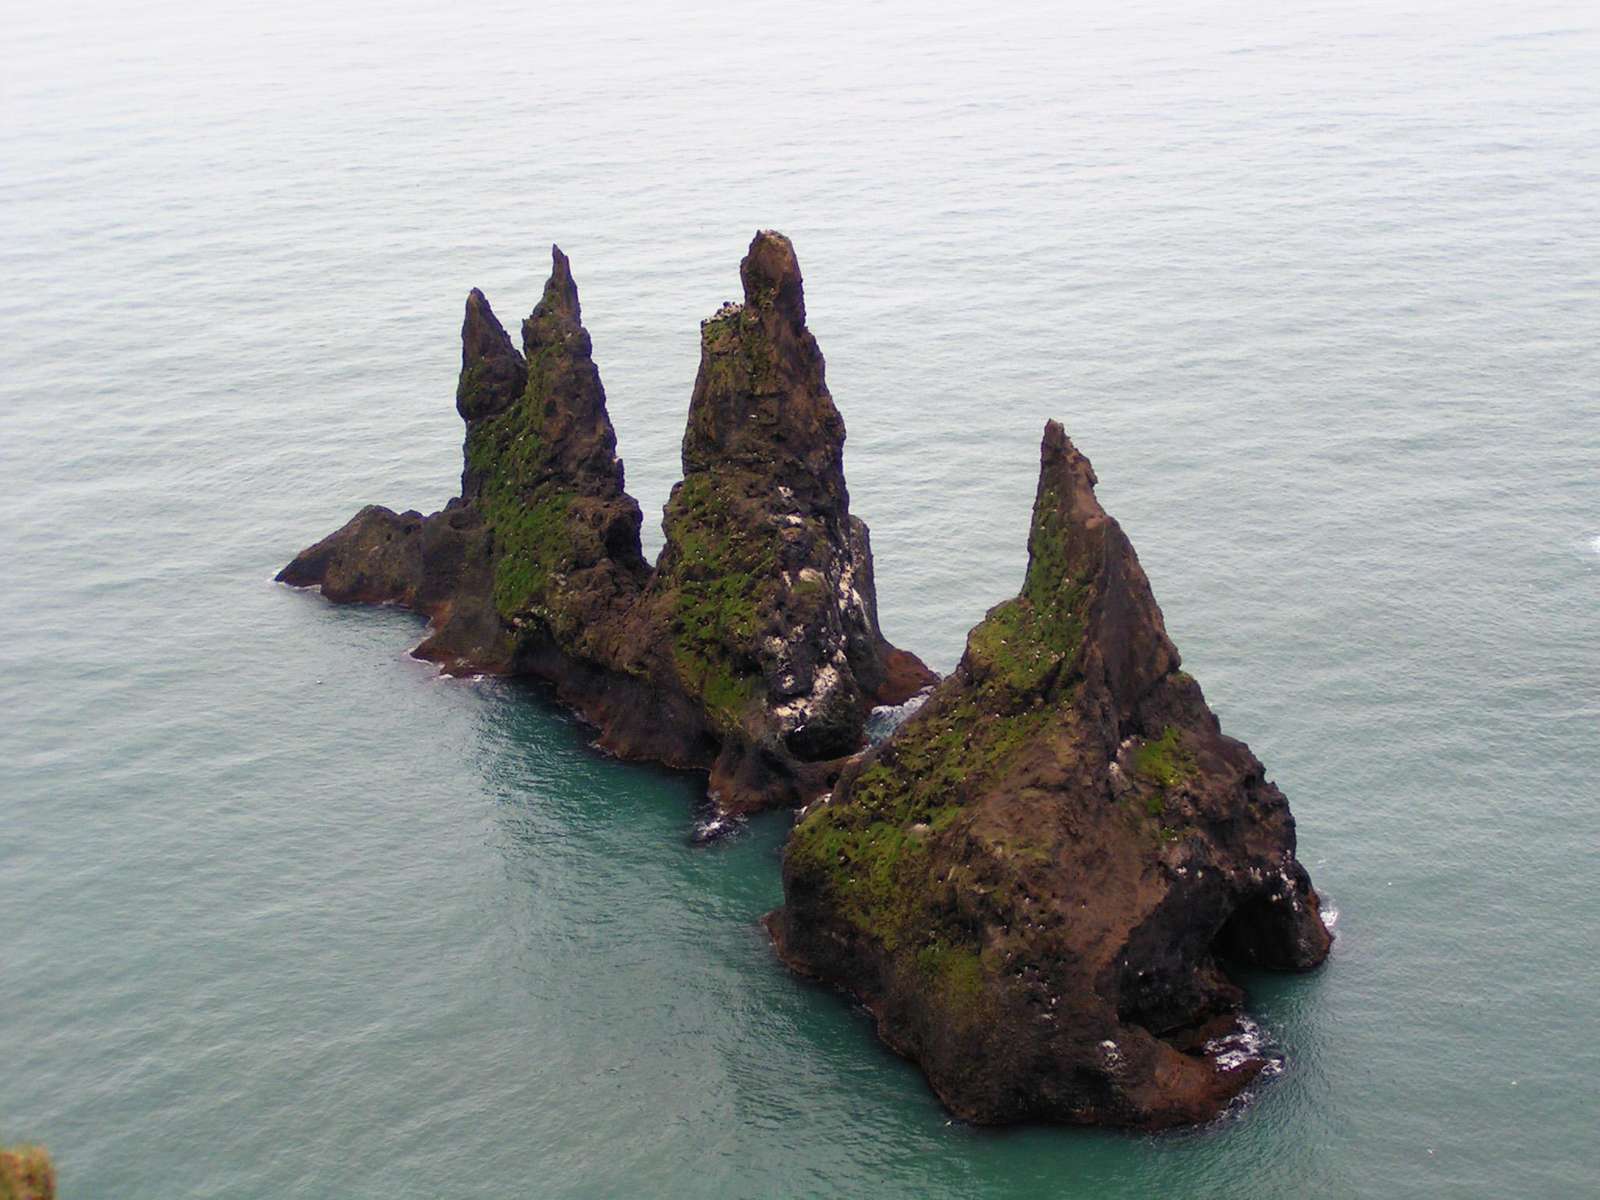 Rocks in the sea near Southern Iceland